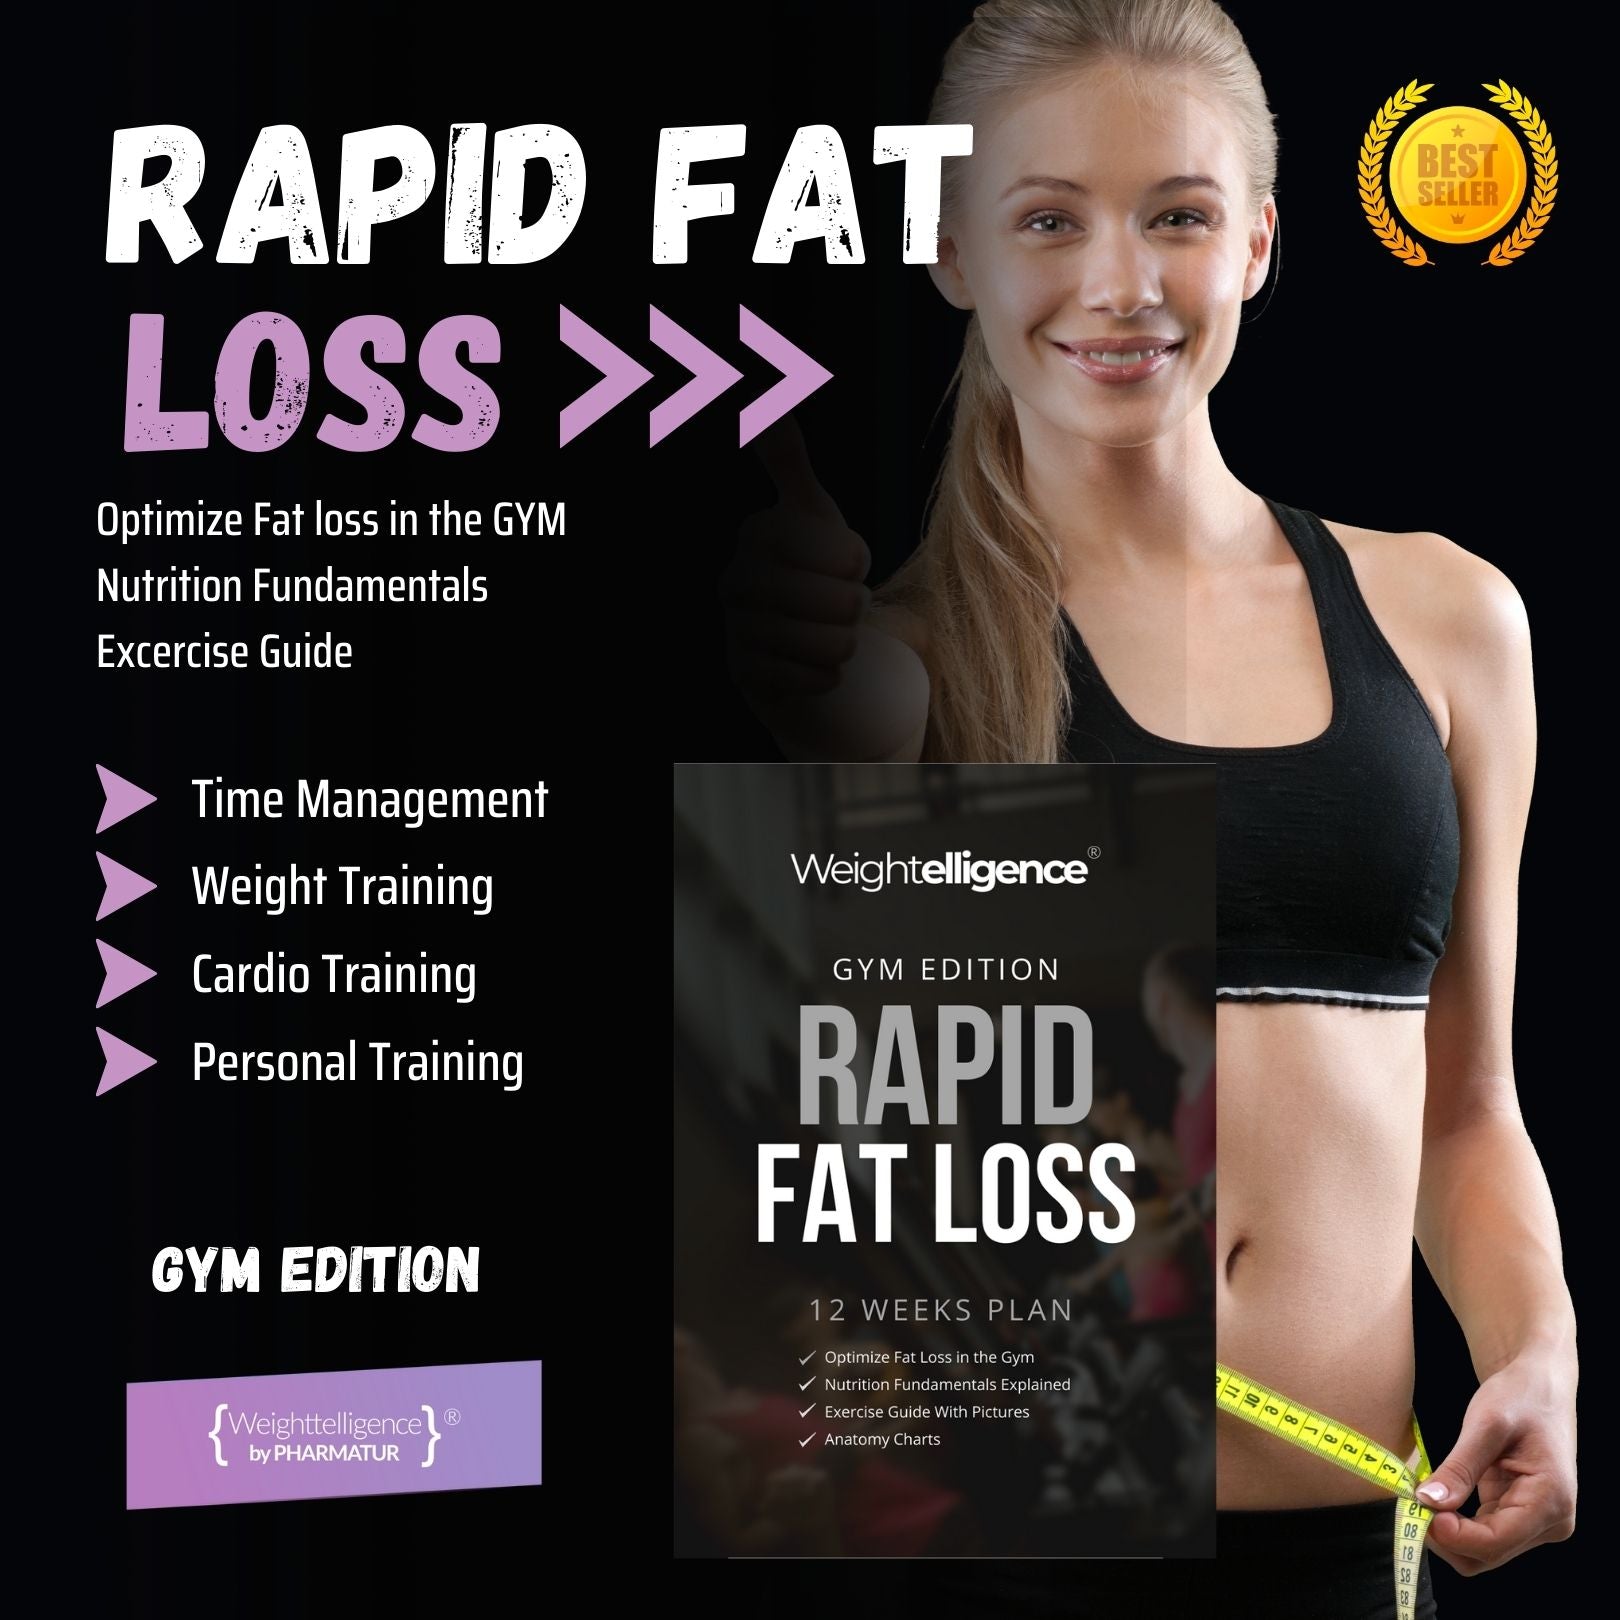 Weightelligence Rapid Fat Loss Gym Edition